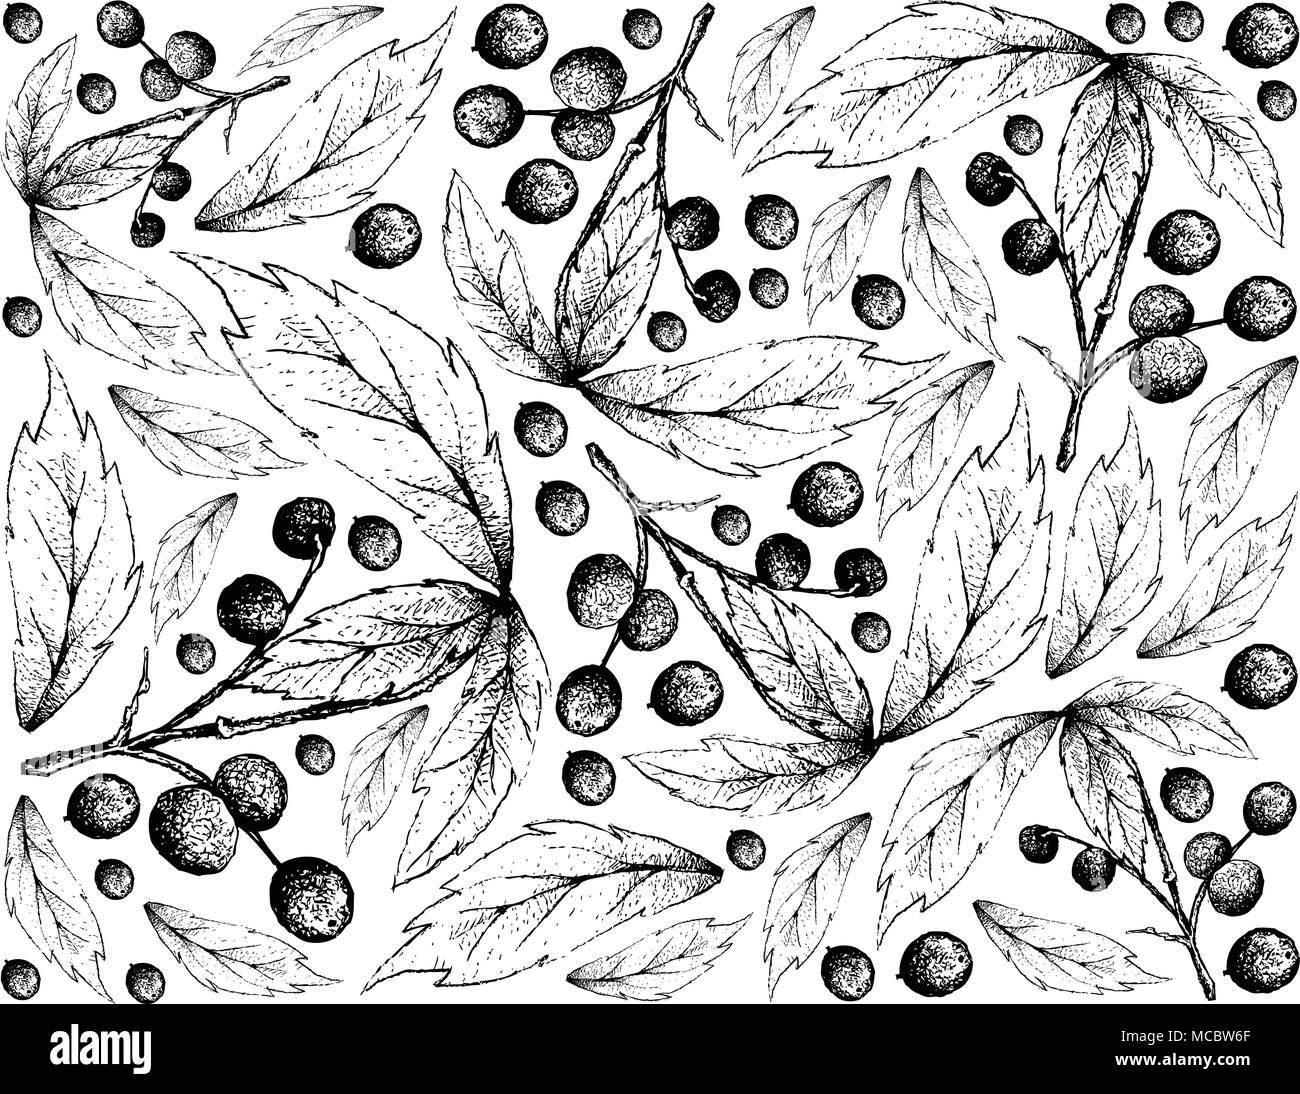 Berry Fruits, Illustration Wallpaper Background of Hand Drawn Sketch Allophylus Edulis or Chal-Chal Fruits. Stock Vector